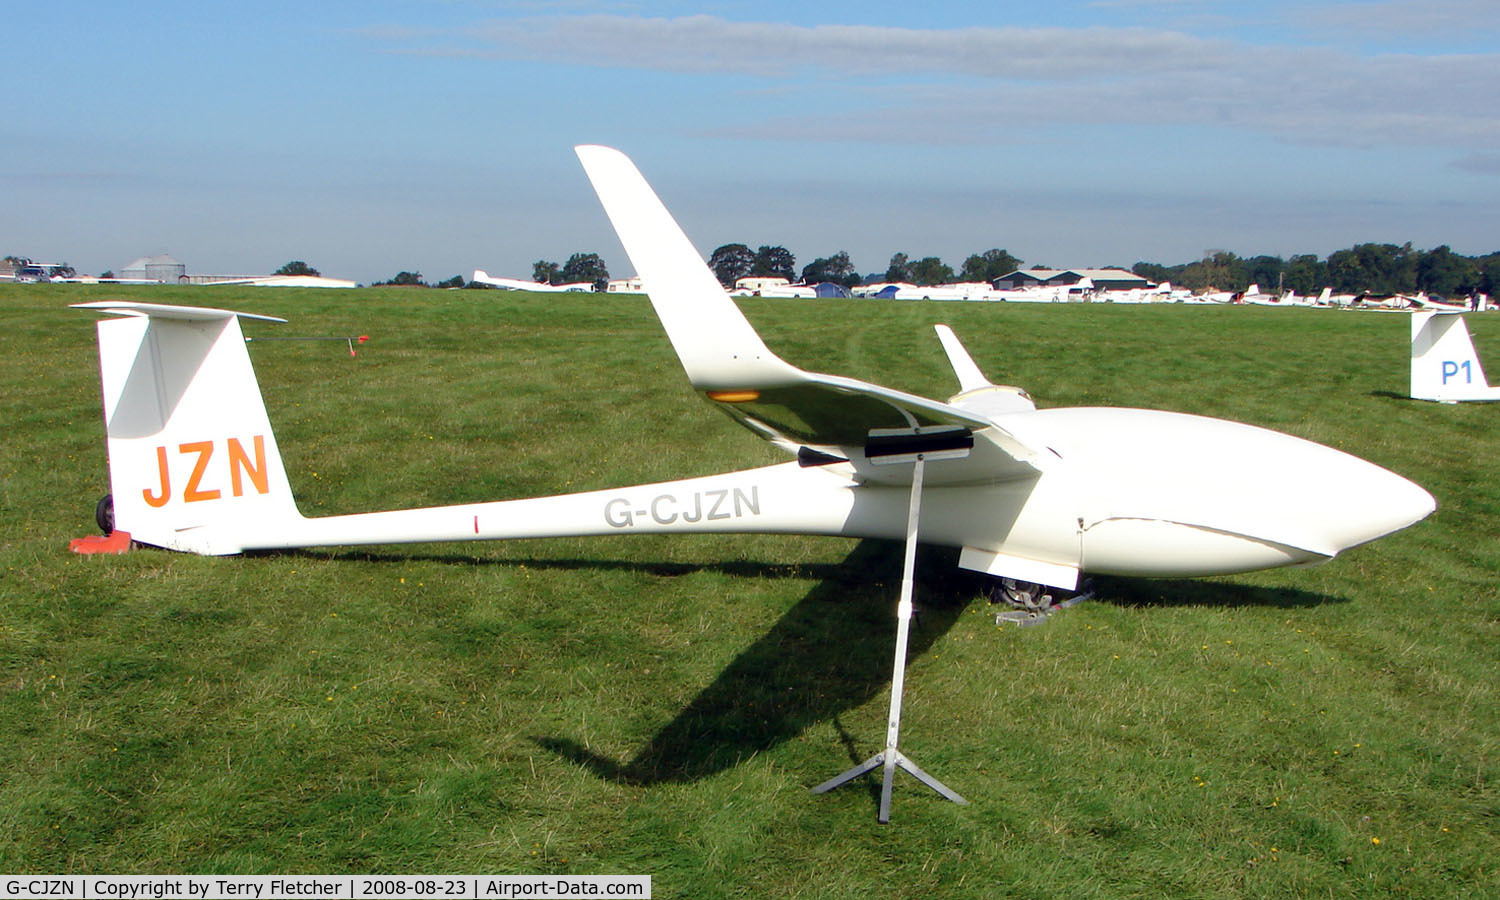 G-CJZN, 2001 Schleicher ASW-28 C/N 28038, Competitor in the Midland Regional Gliding Championship at Husband's Bosworth